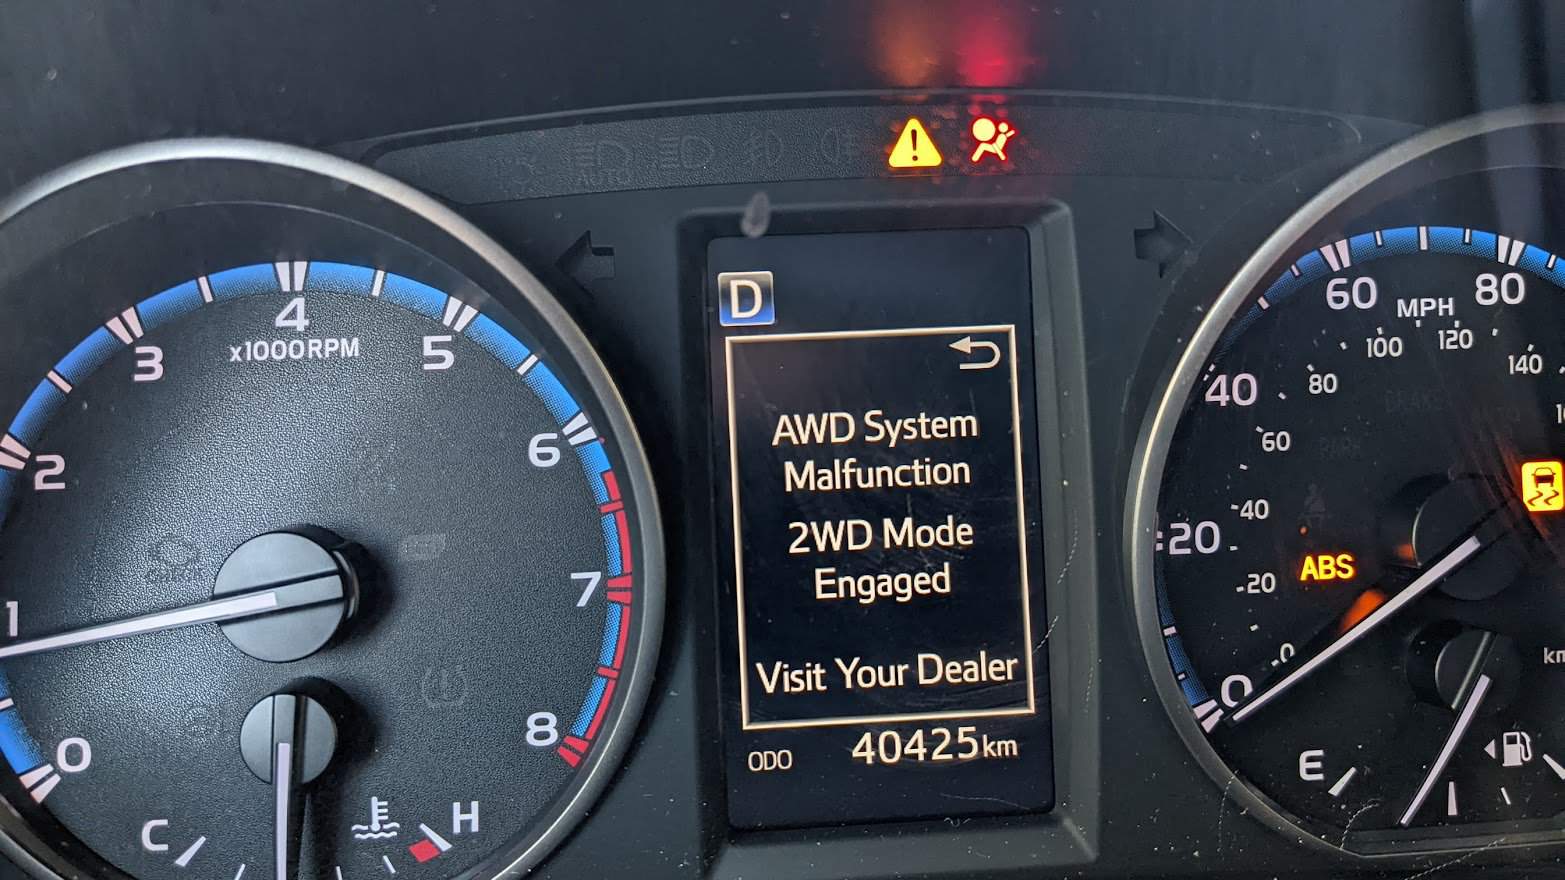 How to Fix Awd System Malfunction Rav4